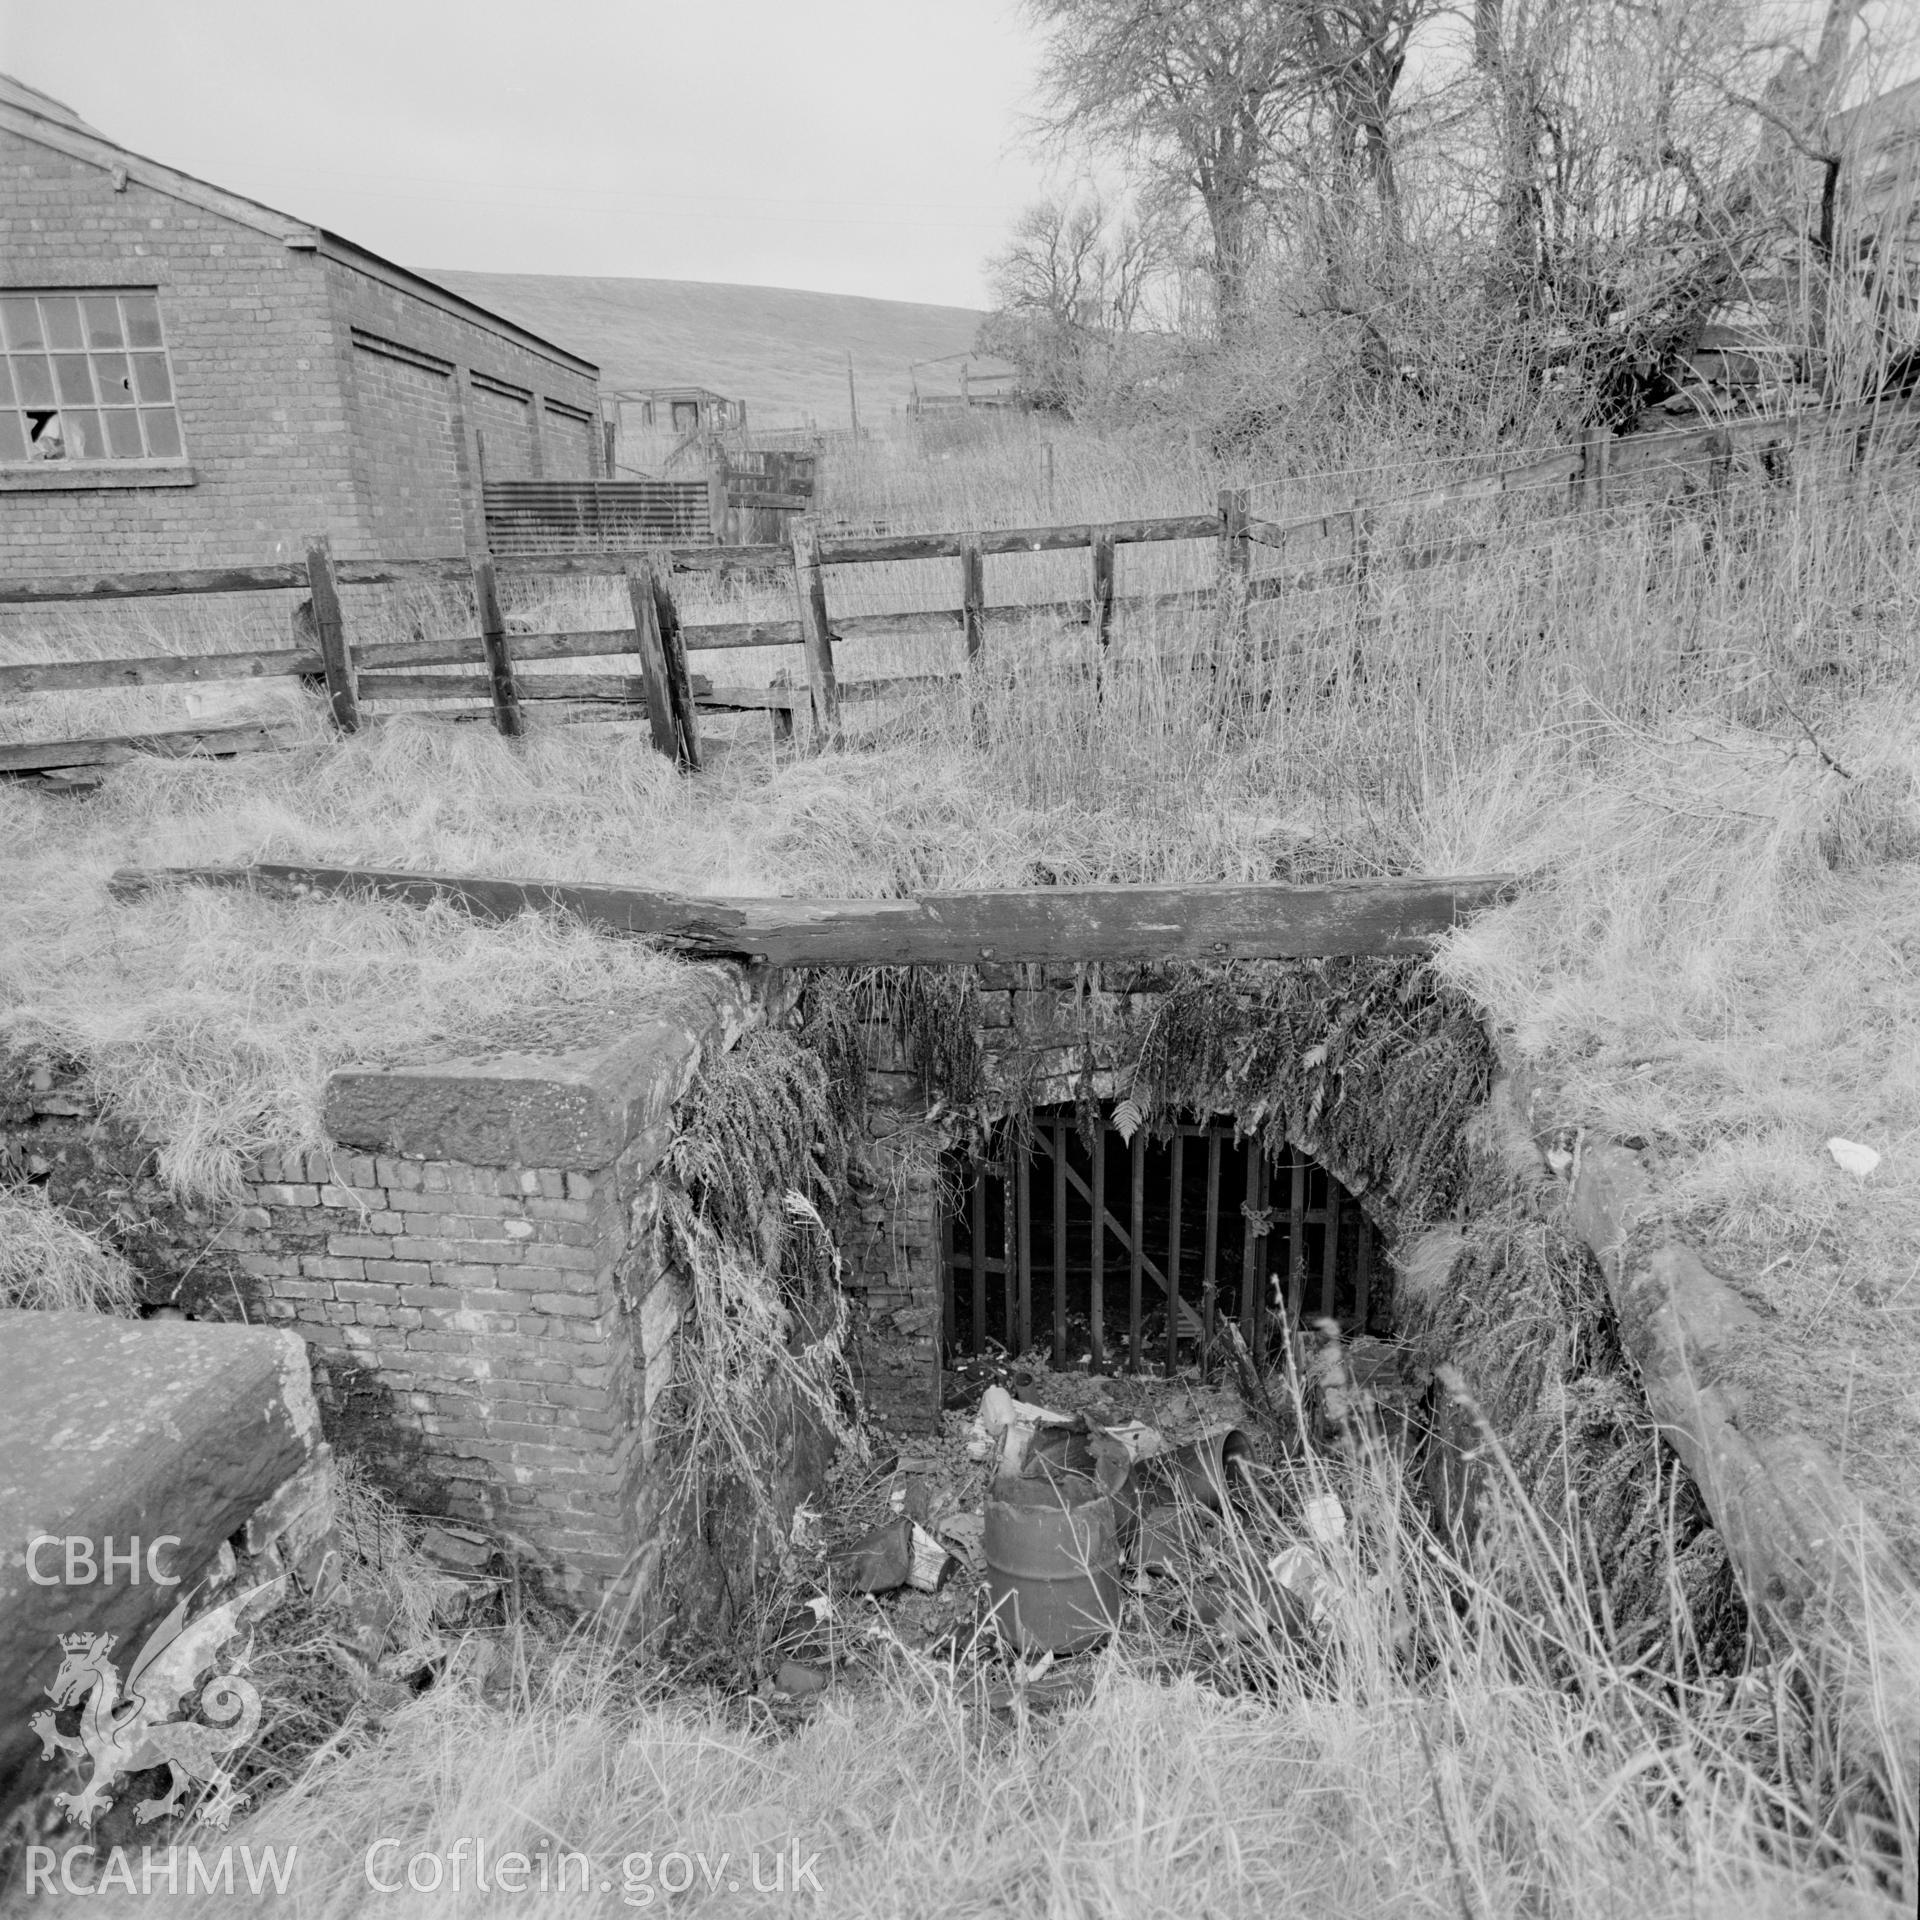 Digital copy of an acetate negative showing Kay's slope at Big Pit, close up of entrance, from the John Cornwell Collection.